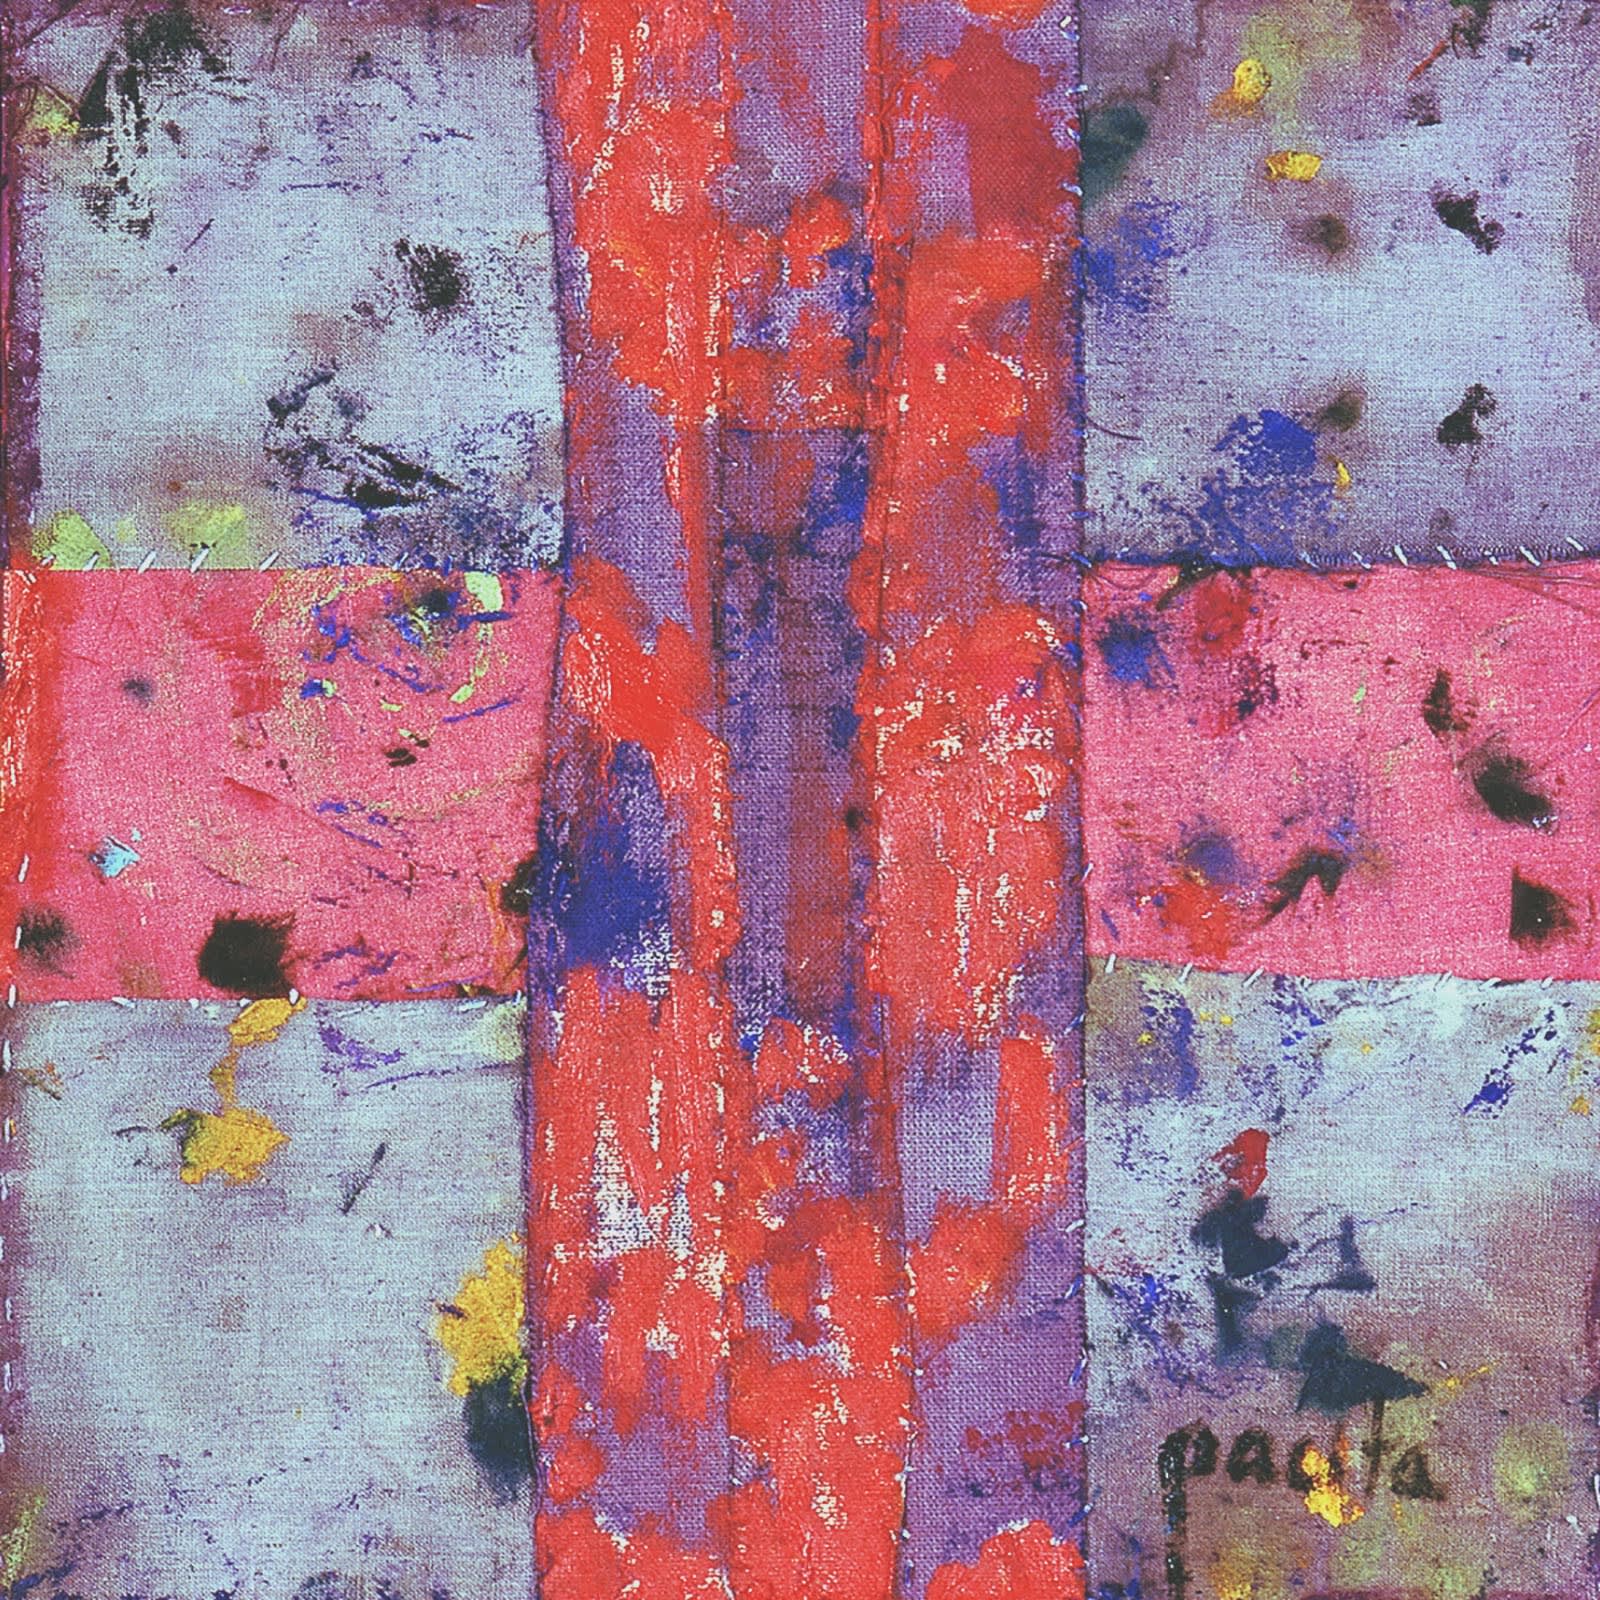 Encounter, 1998 Oil, painted dyed canvas stitched on canvas 12 x 12 in 30 x 30 cm